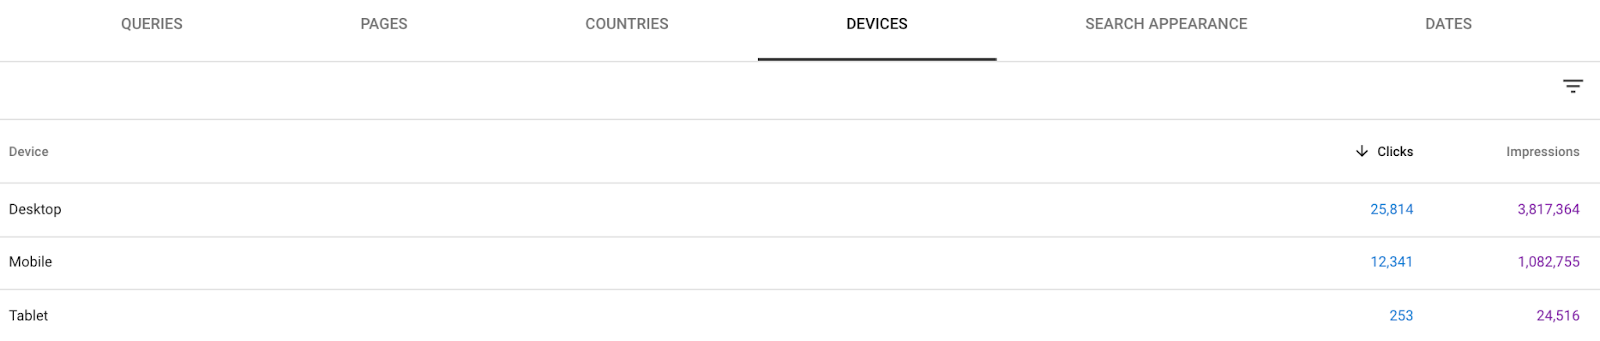 data about clicks and impressions according to device categories